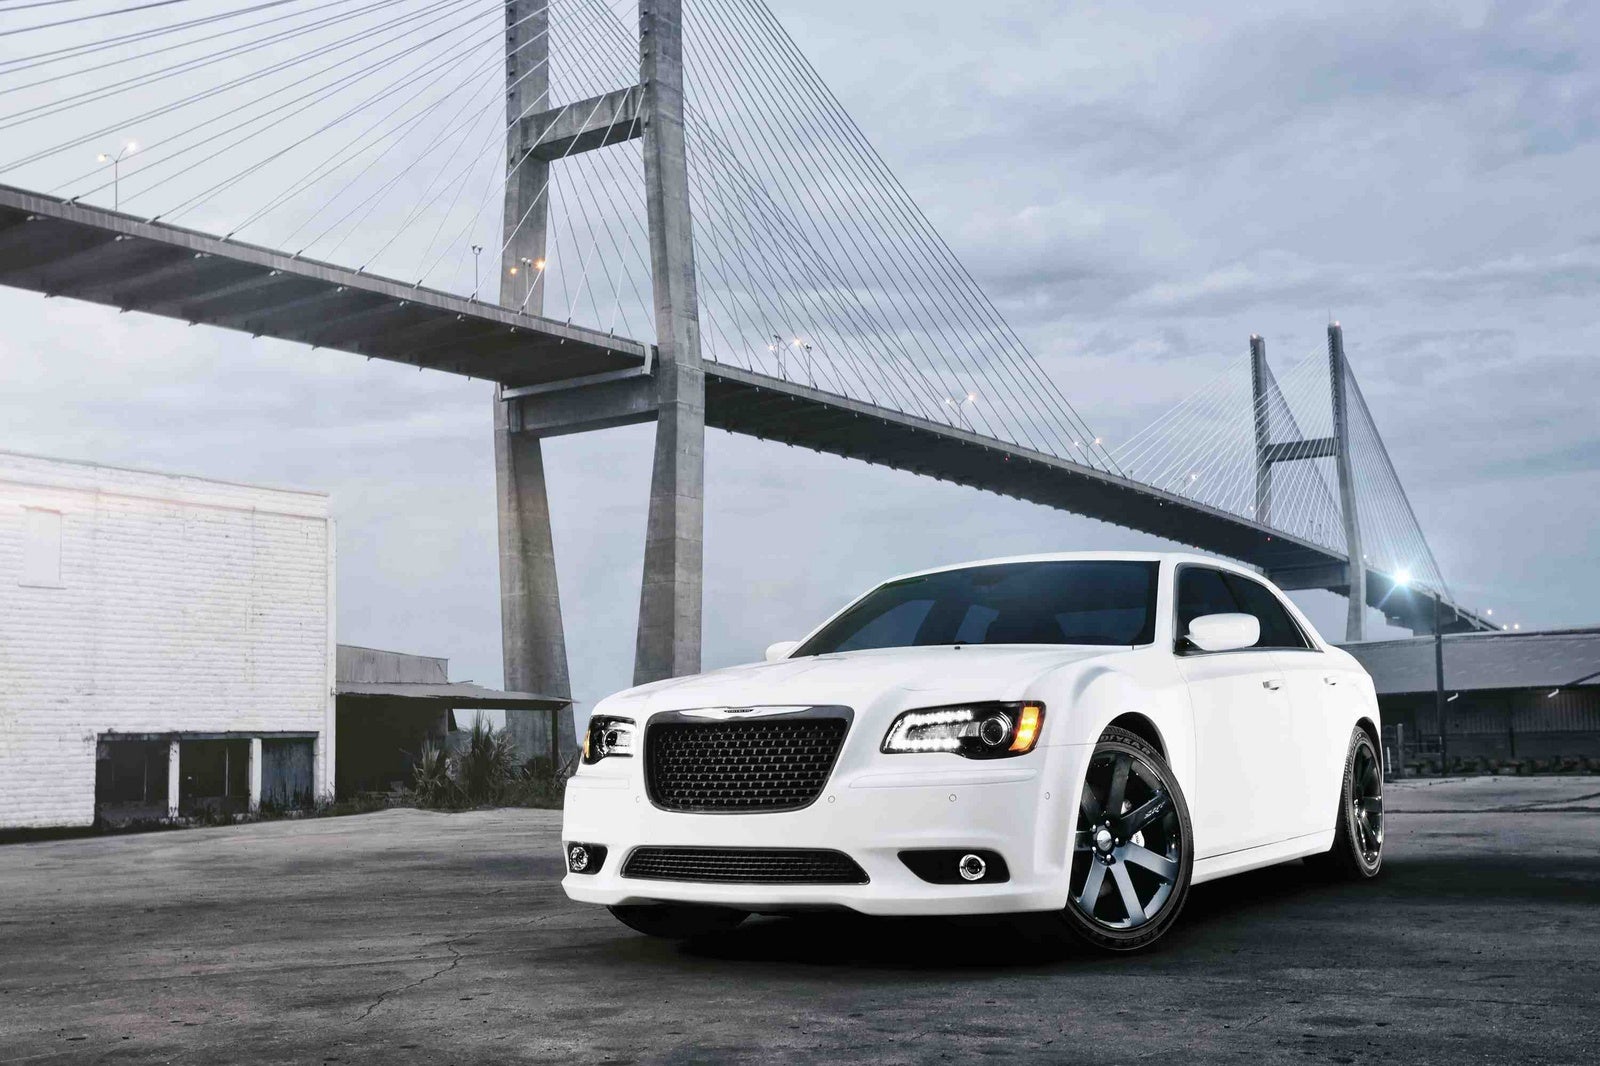 2012 Chrysler 300 touring review #3